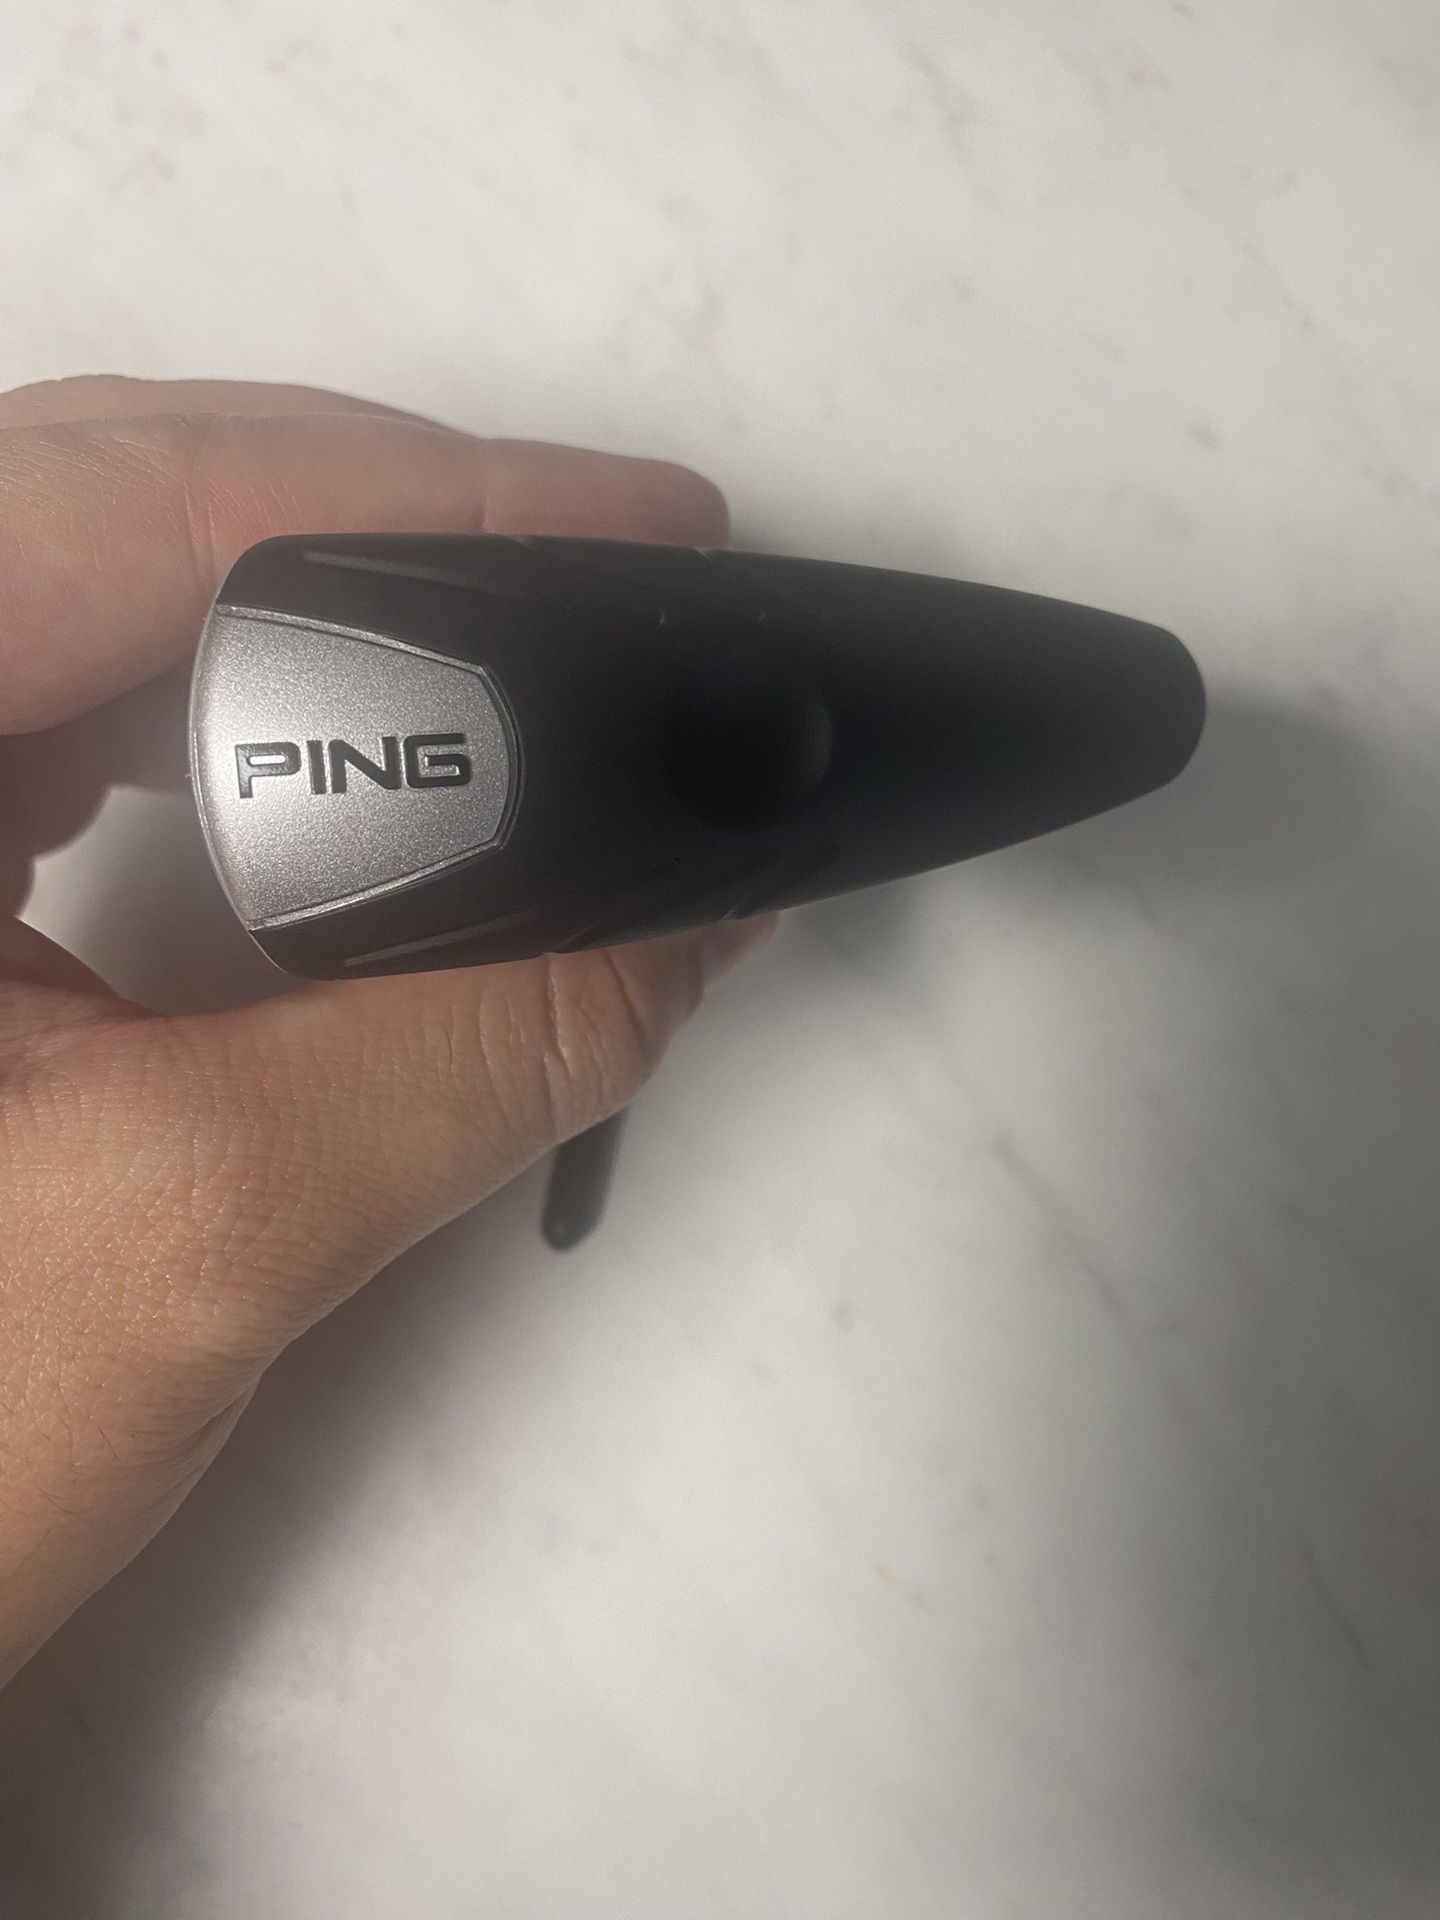 PING G25 Driver Fairway Hybrid Adjustable Torque Wrench Tool